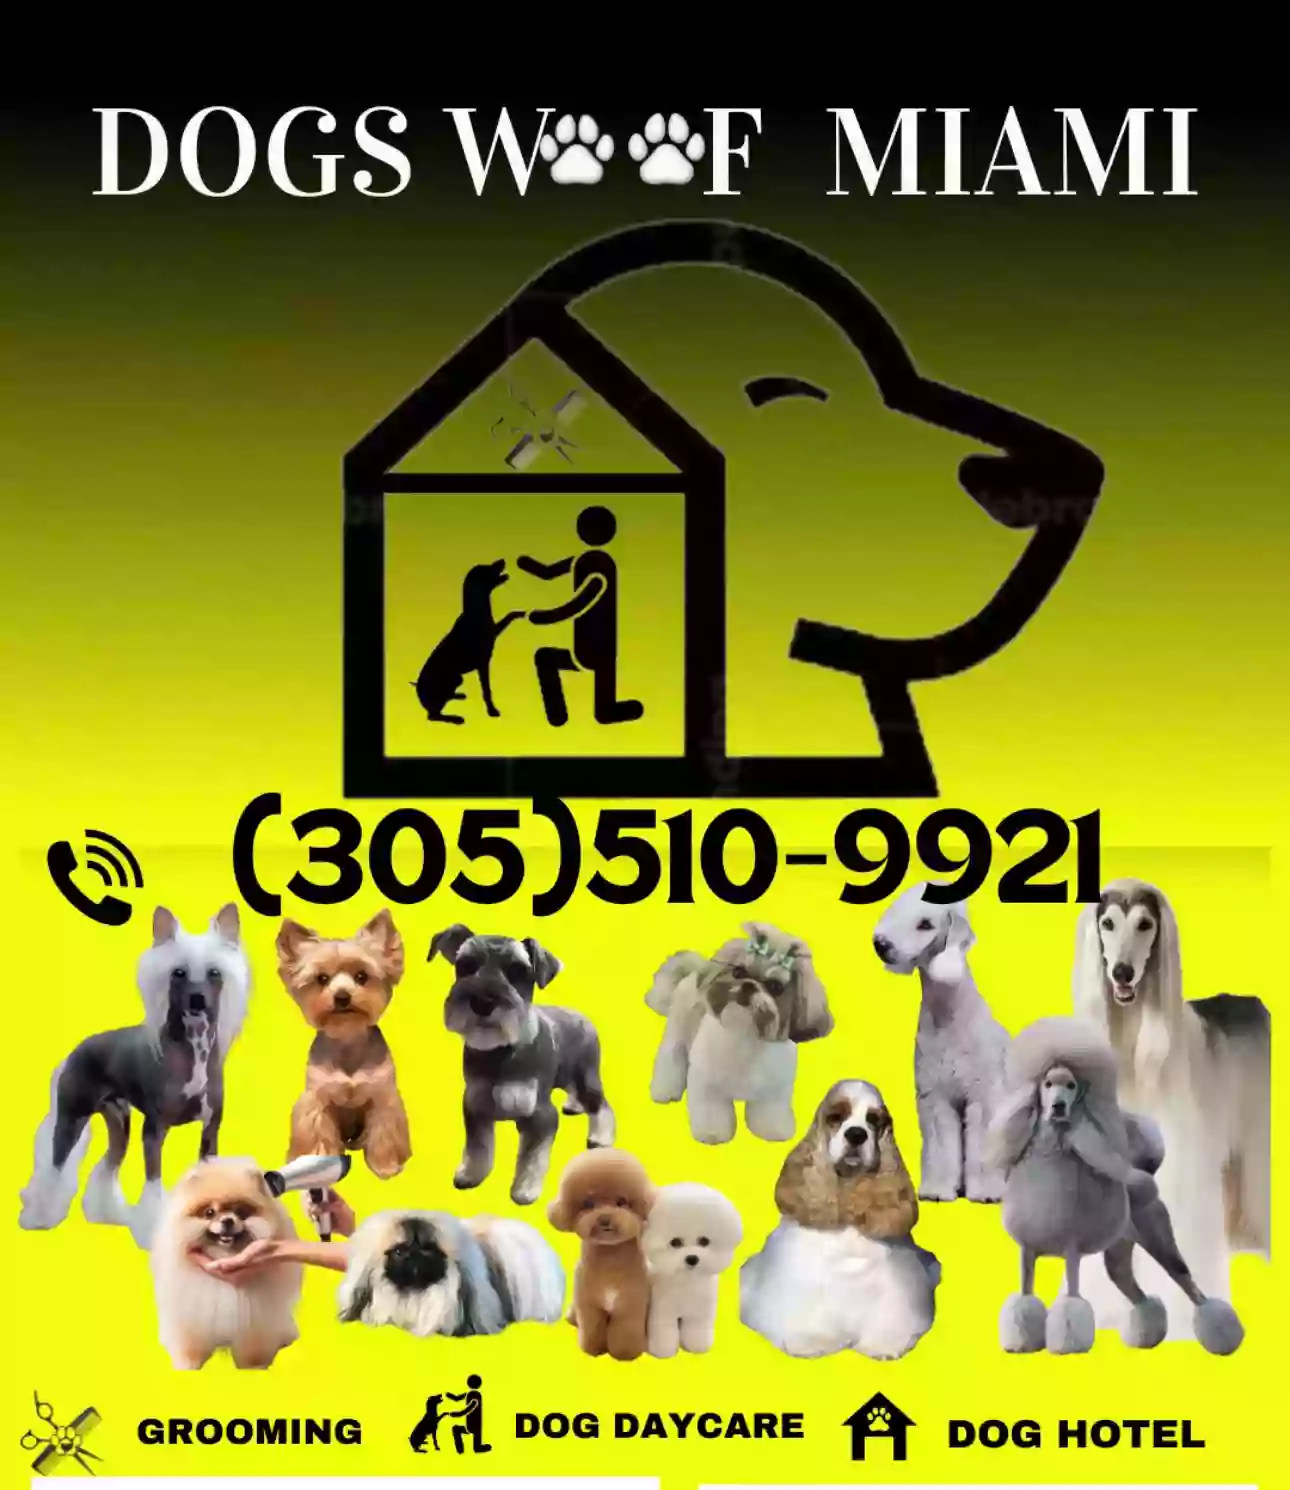 DOGS WOOF MIAMI